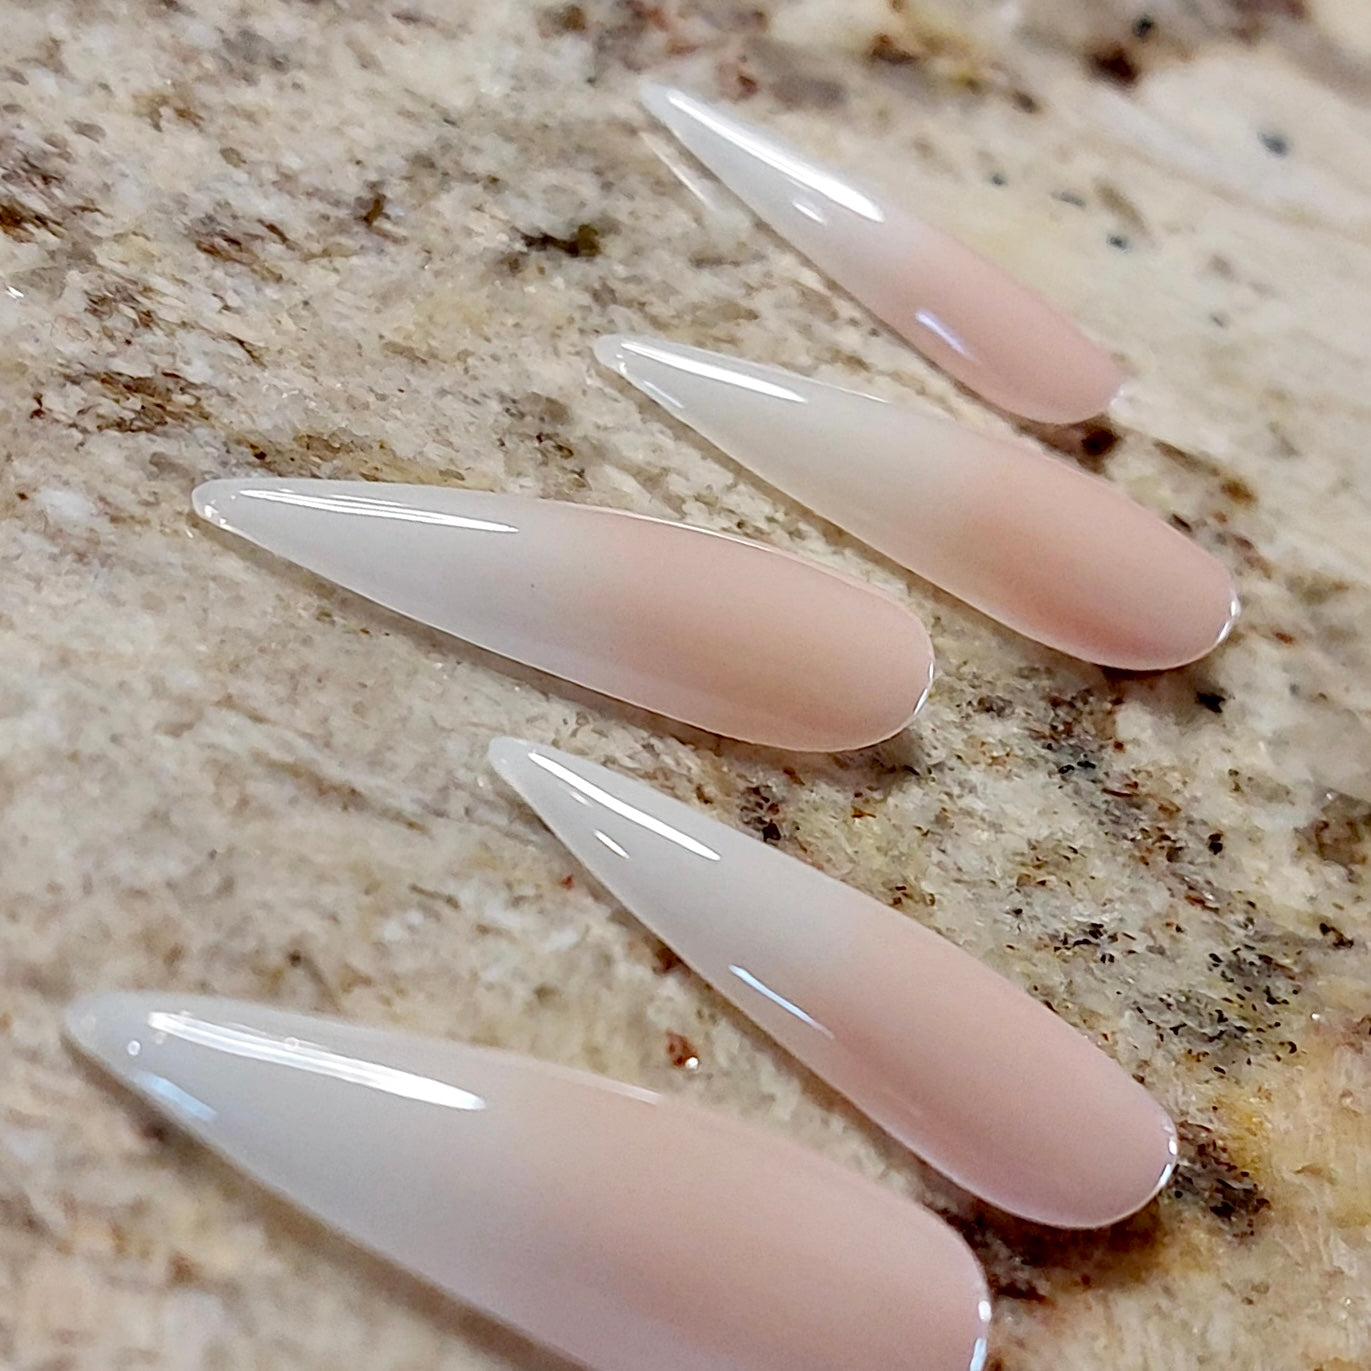 Jelly Ombré | Ombre French Style Nails with Milky Tip and Nude Jelly Base - FancyB Press-on Nails sharp stiletto ombre nails